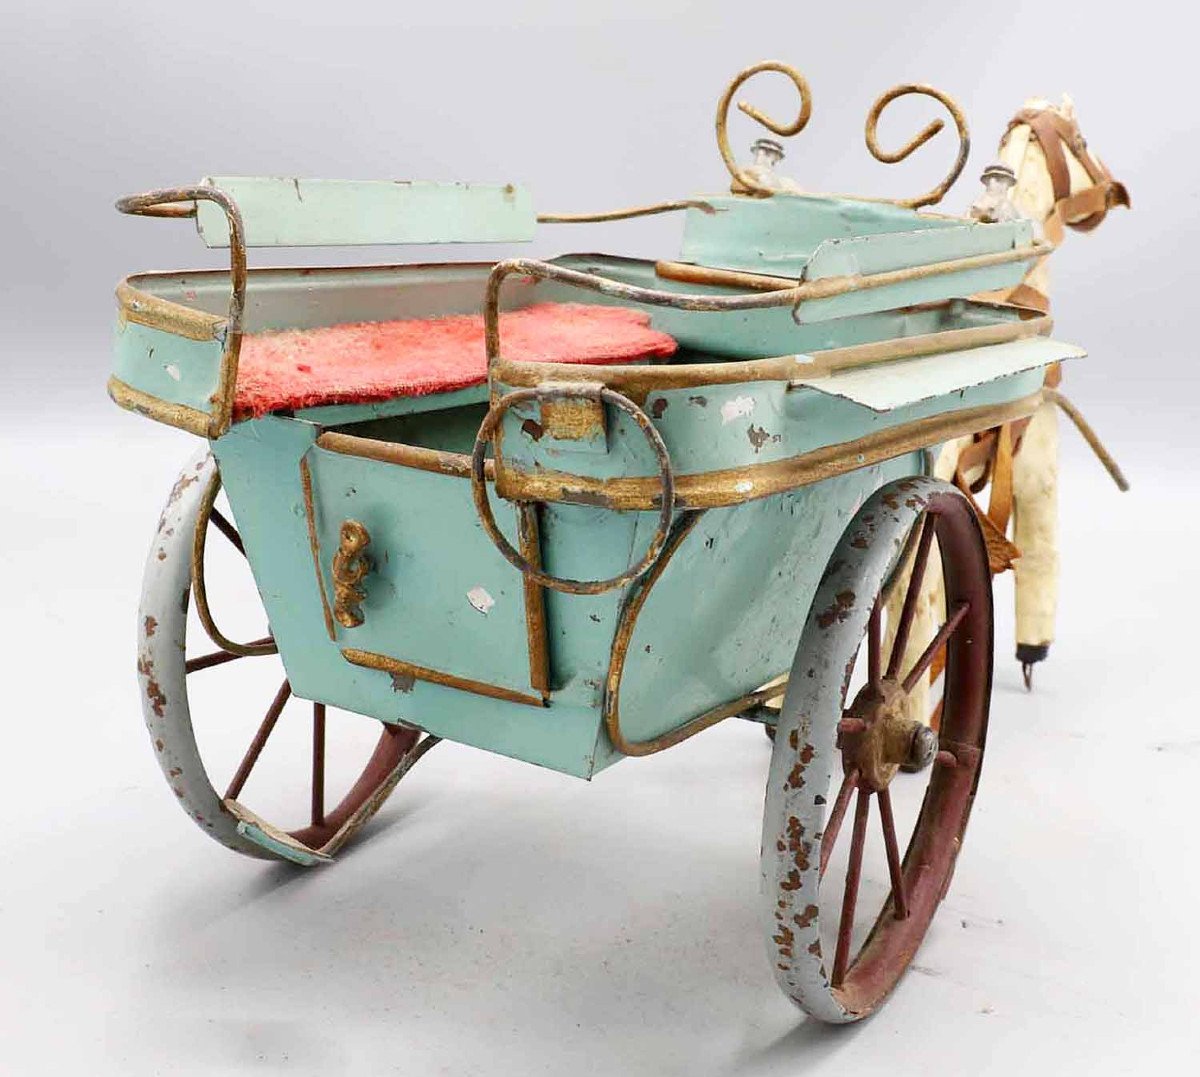 French Toy Carriole Around 1880 - 1900-photo-2